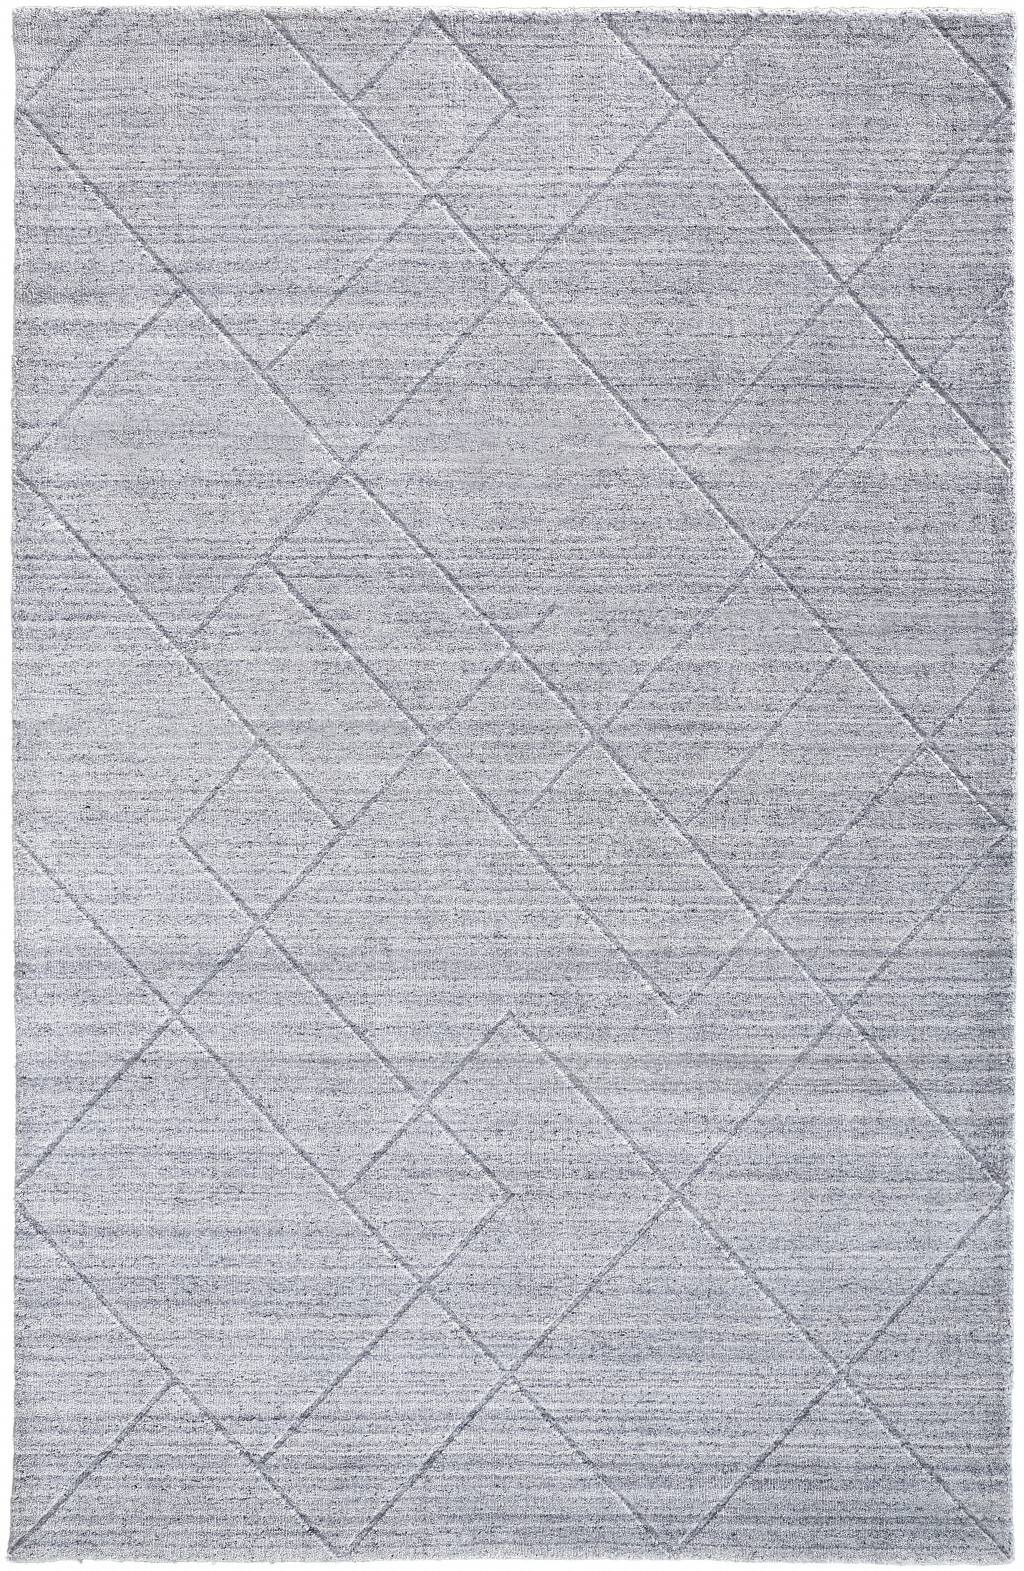 9' X 12' Gray And Silver Striped Hand Woven Area Rug-514794-1